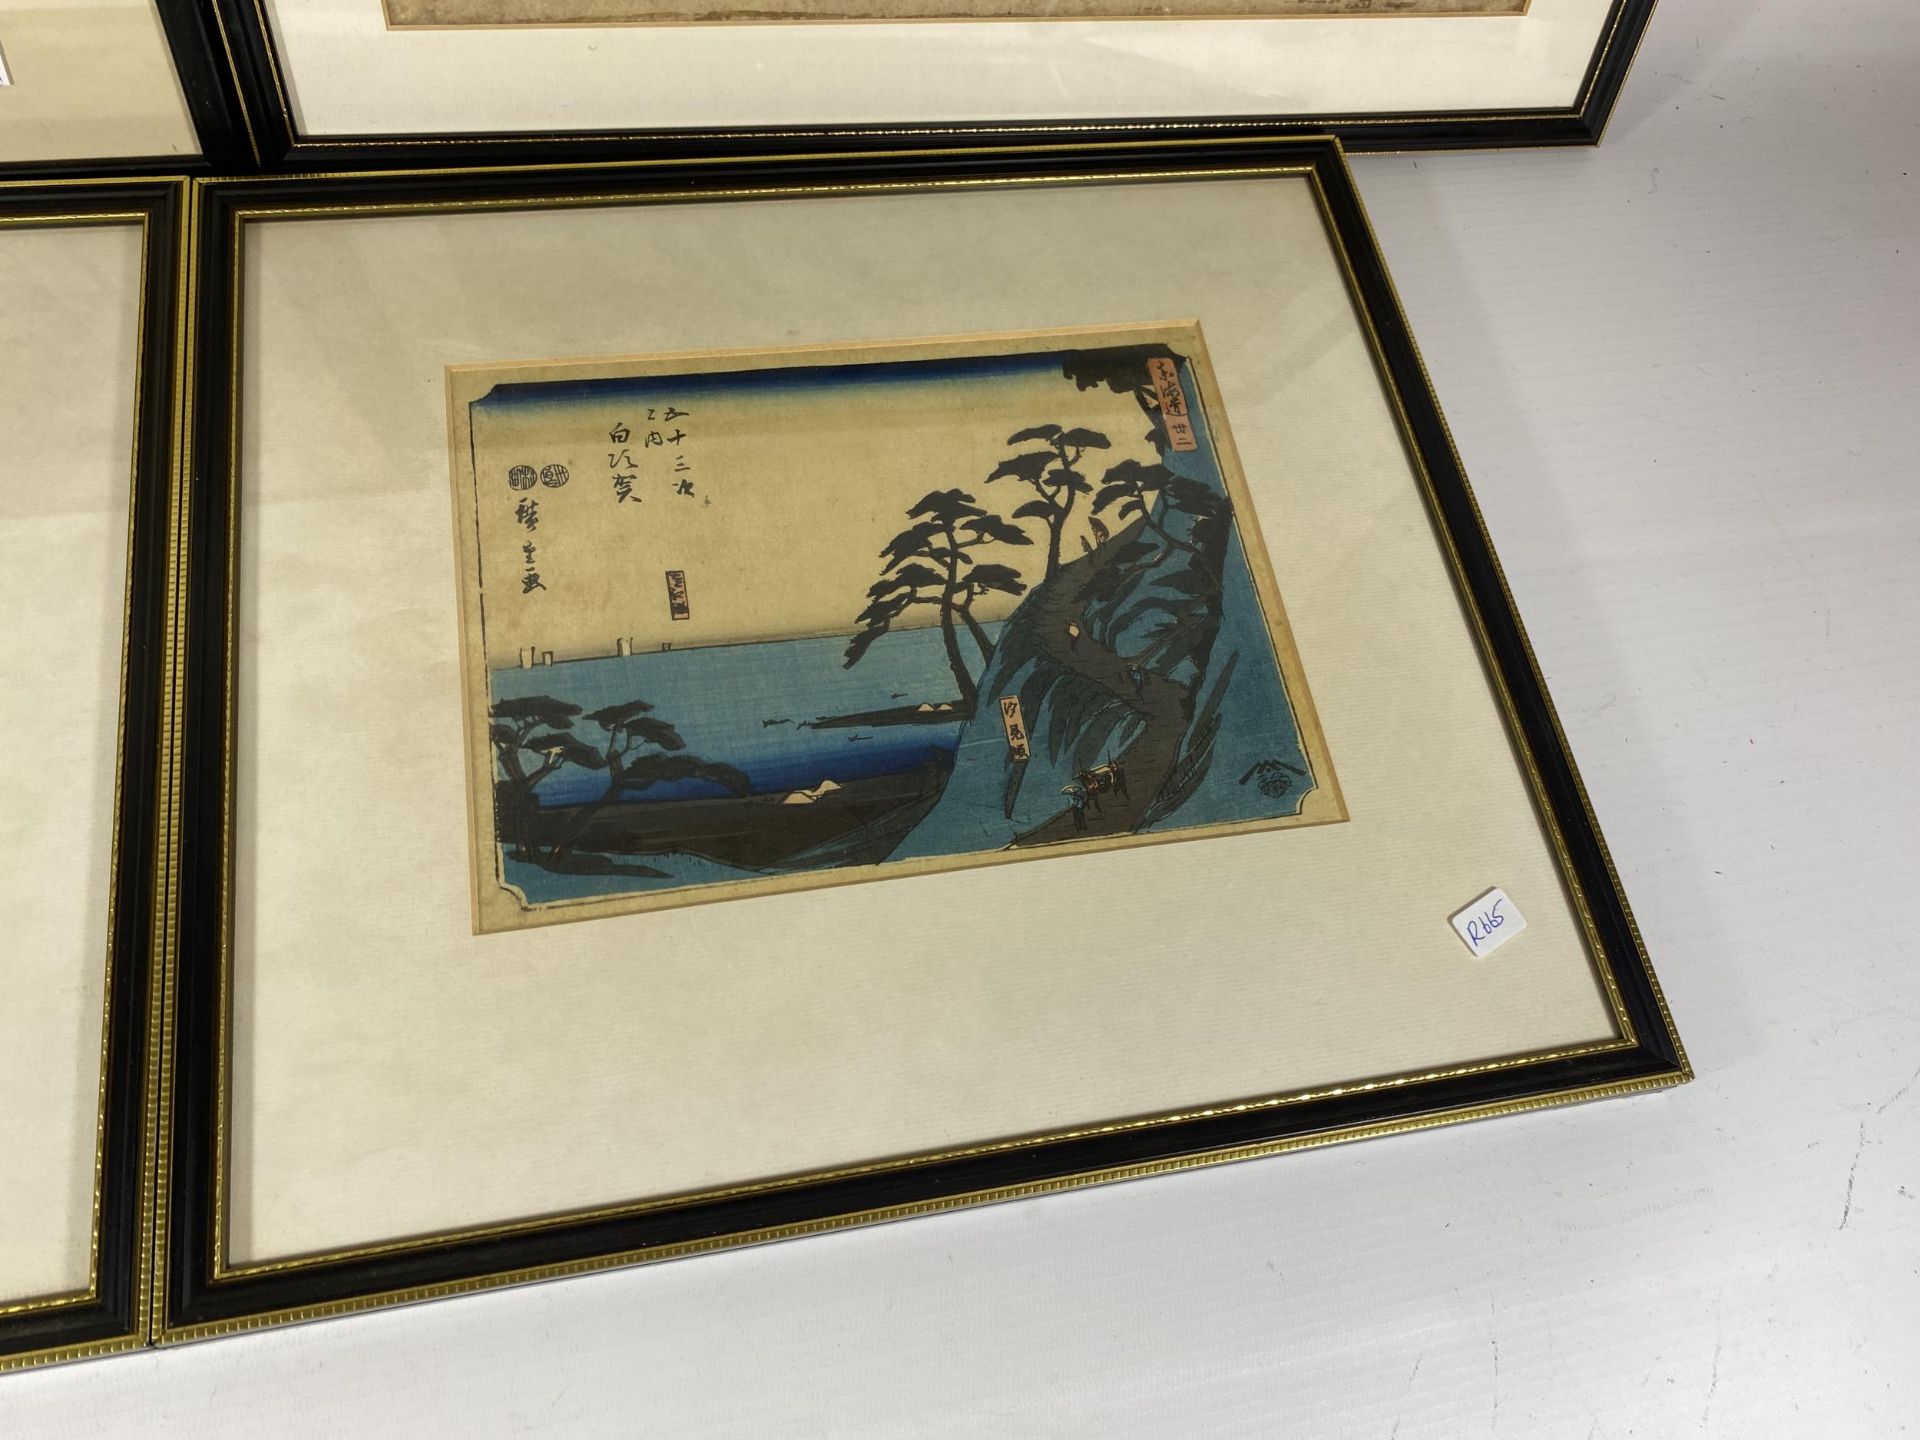 A GROUP OF FOUR HIROSHIGE JAPANESE WOODBLOCK PRINTS, LARGEST 52 X 37CM - Image 3 of 7